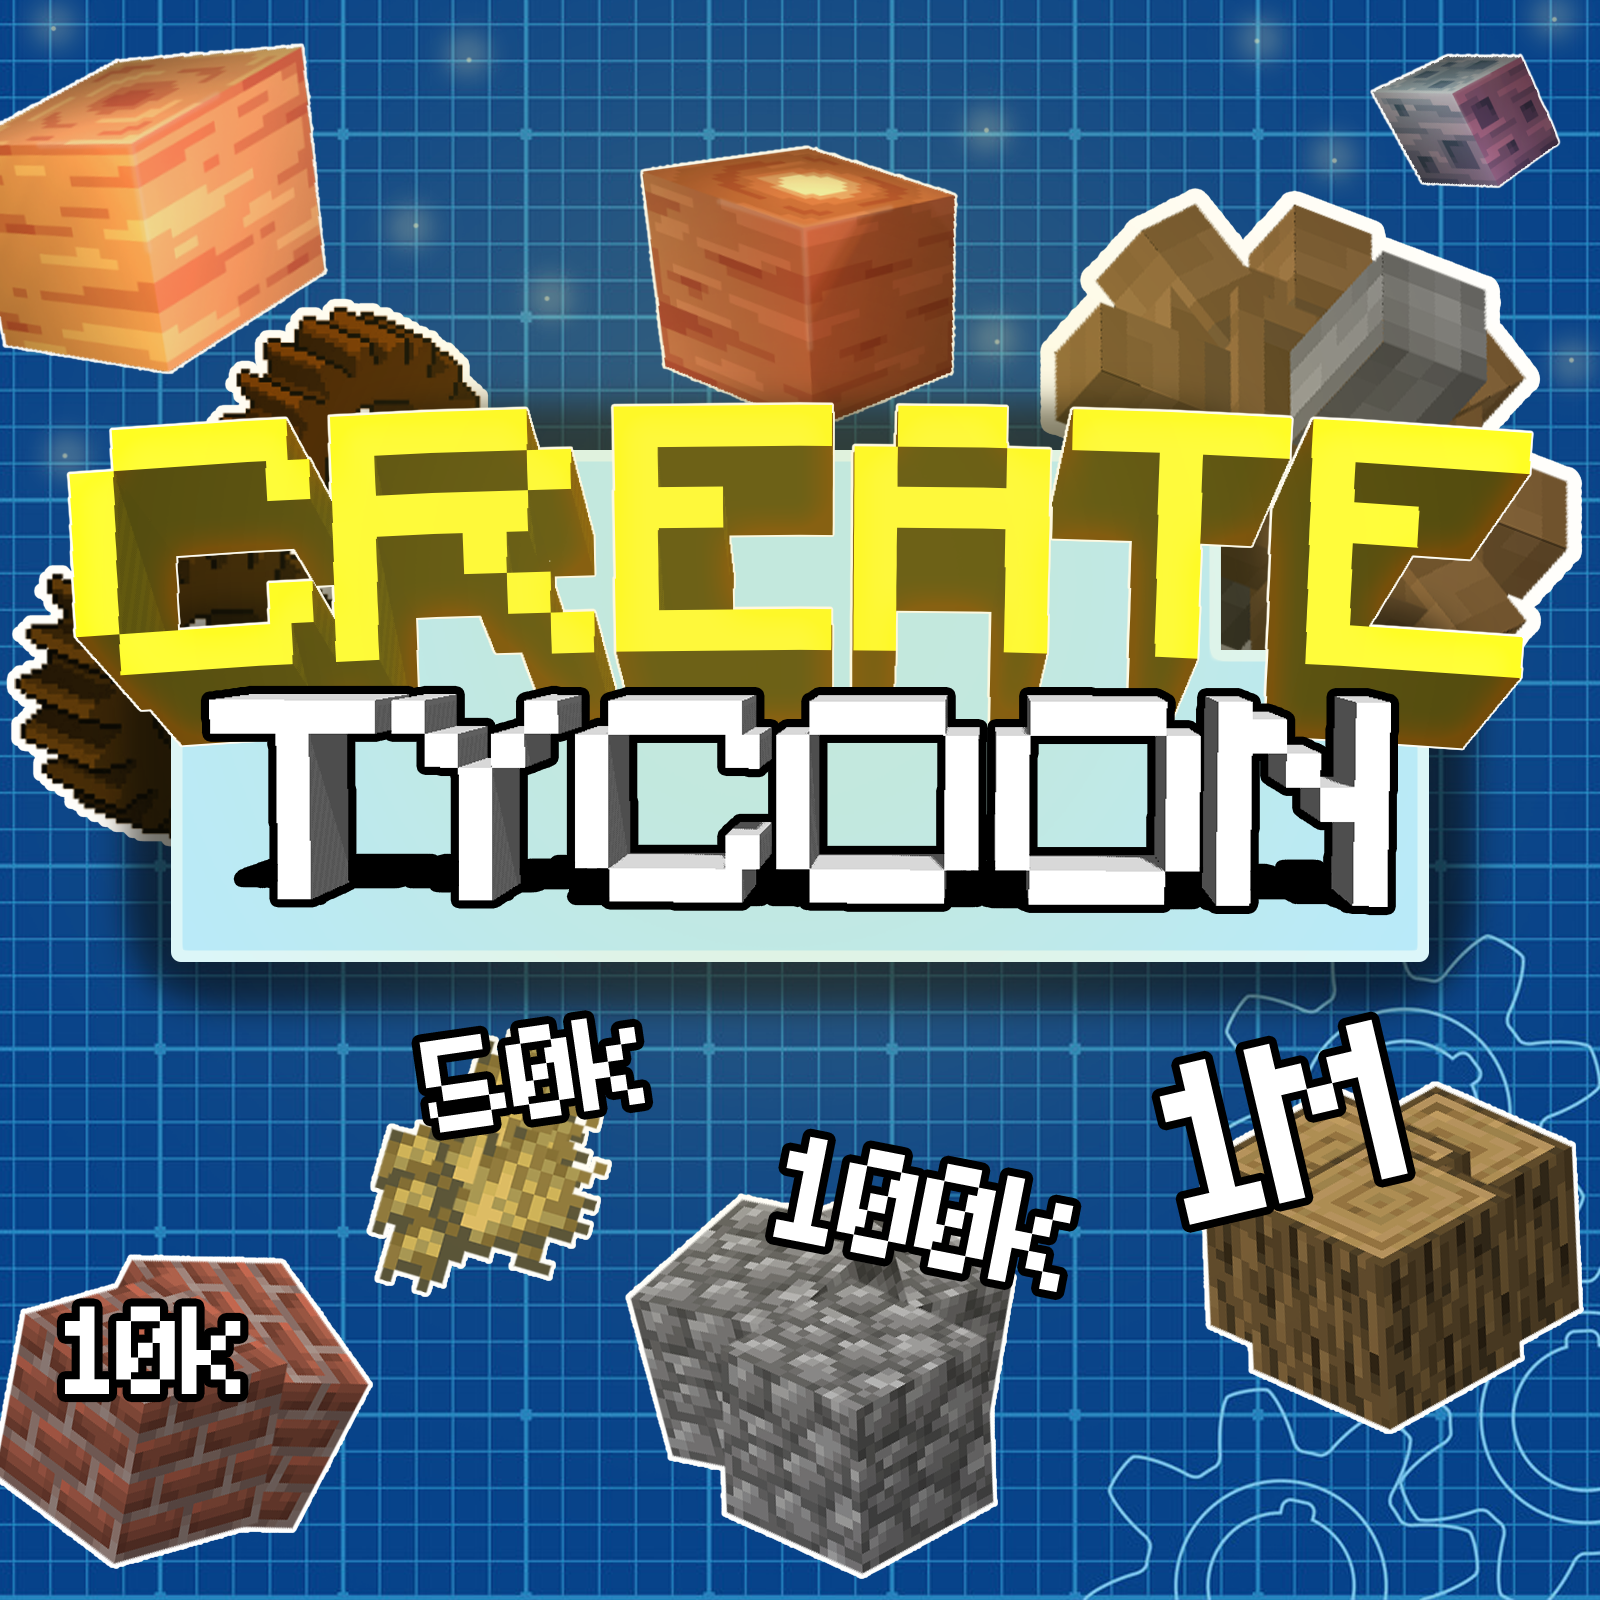 How To Make Tycoon In Minecraft Create Tycoon - Minecraft Modpacks - CurseForge